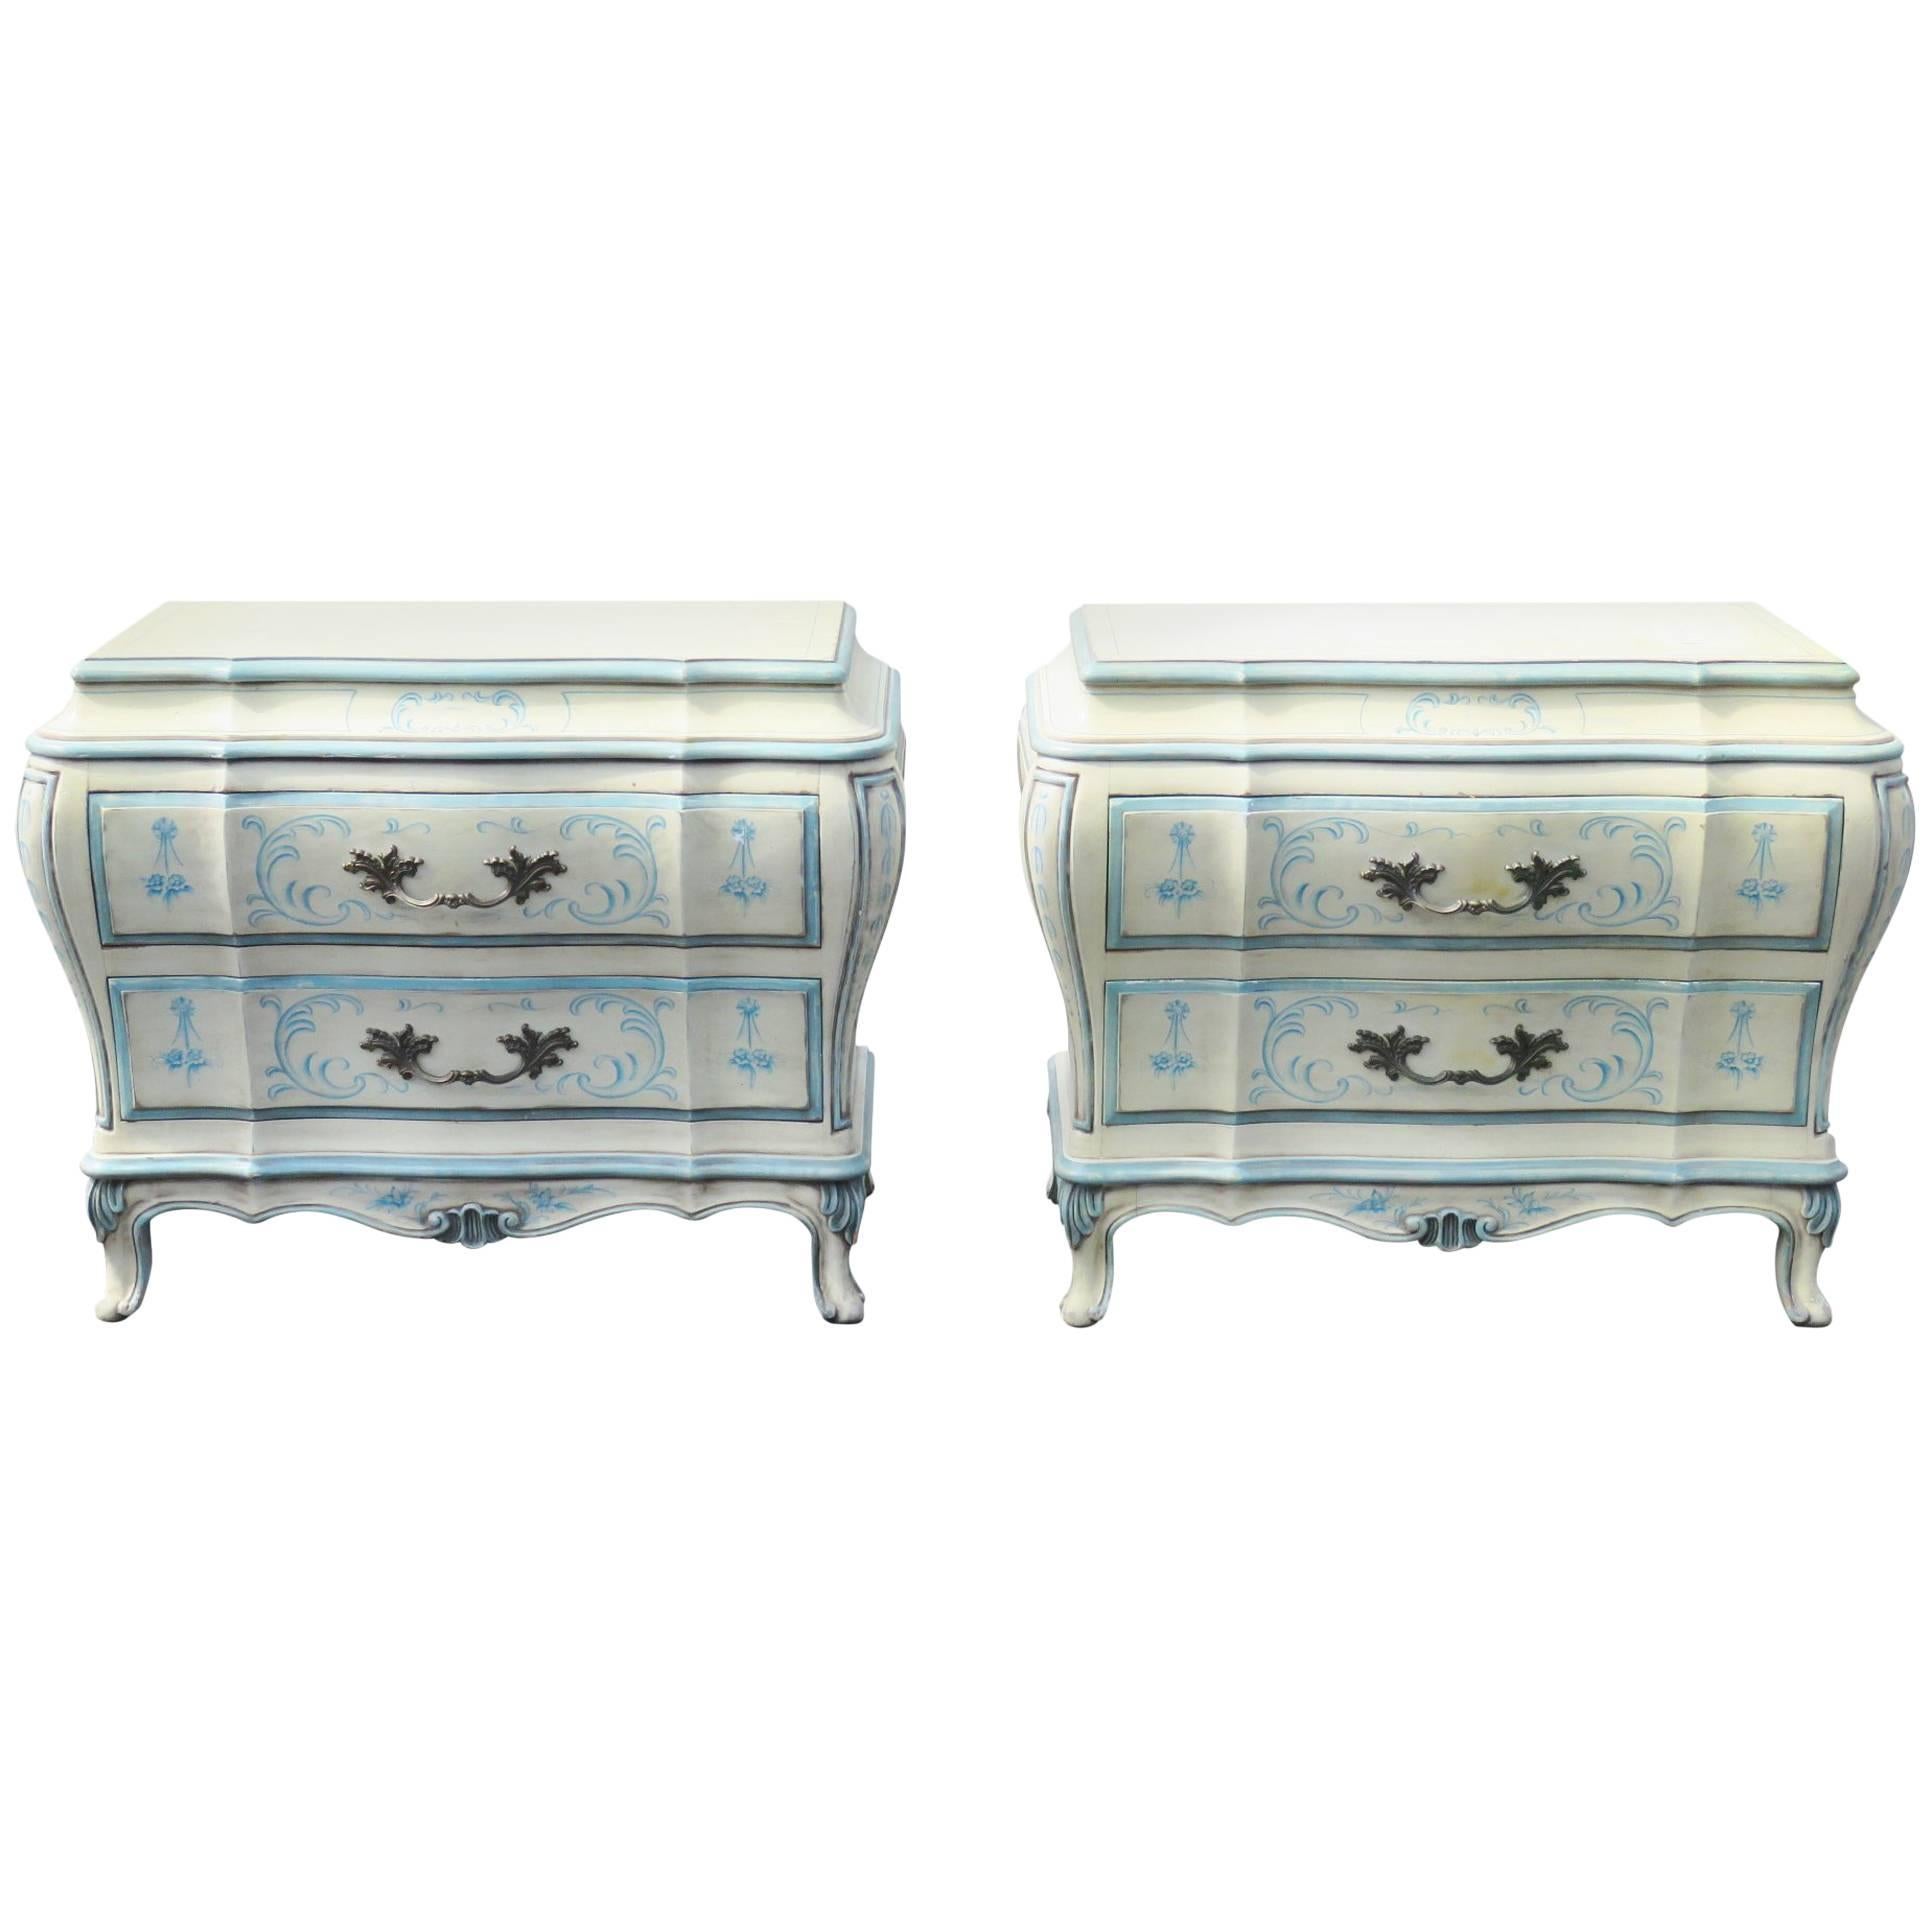 Pair of Karges Paint Decorated Bombe Commodes